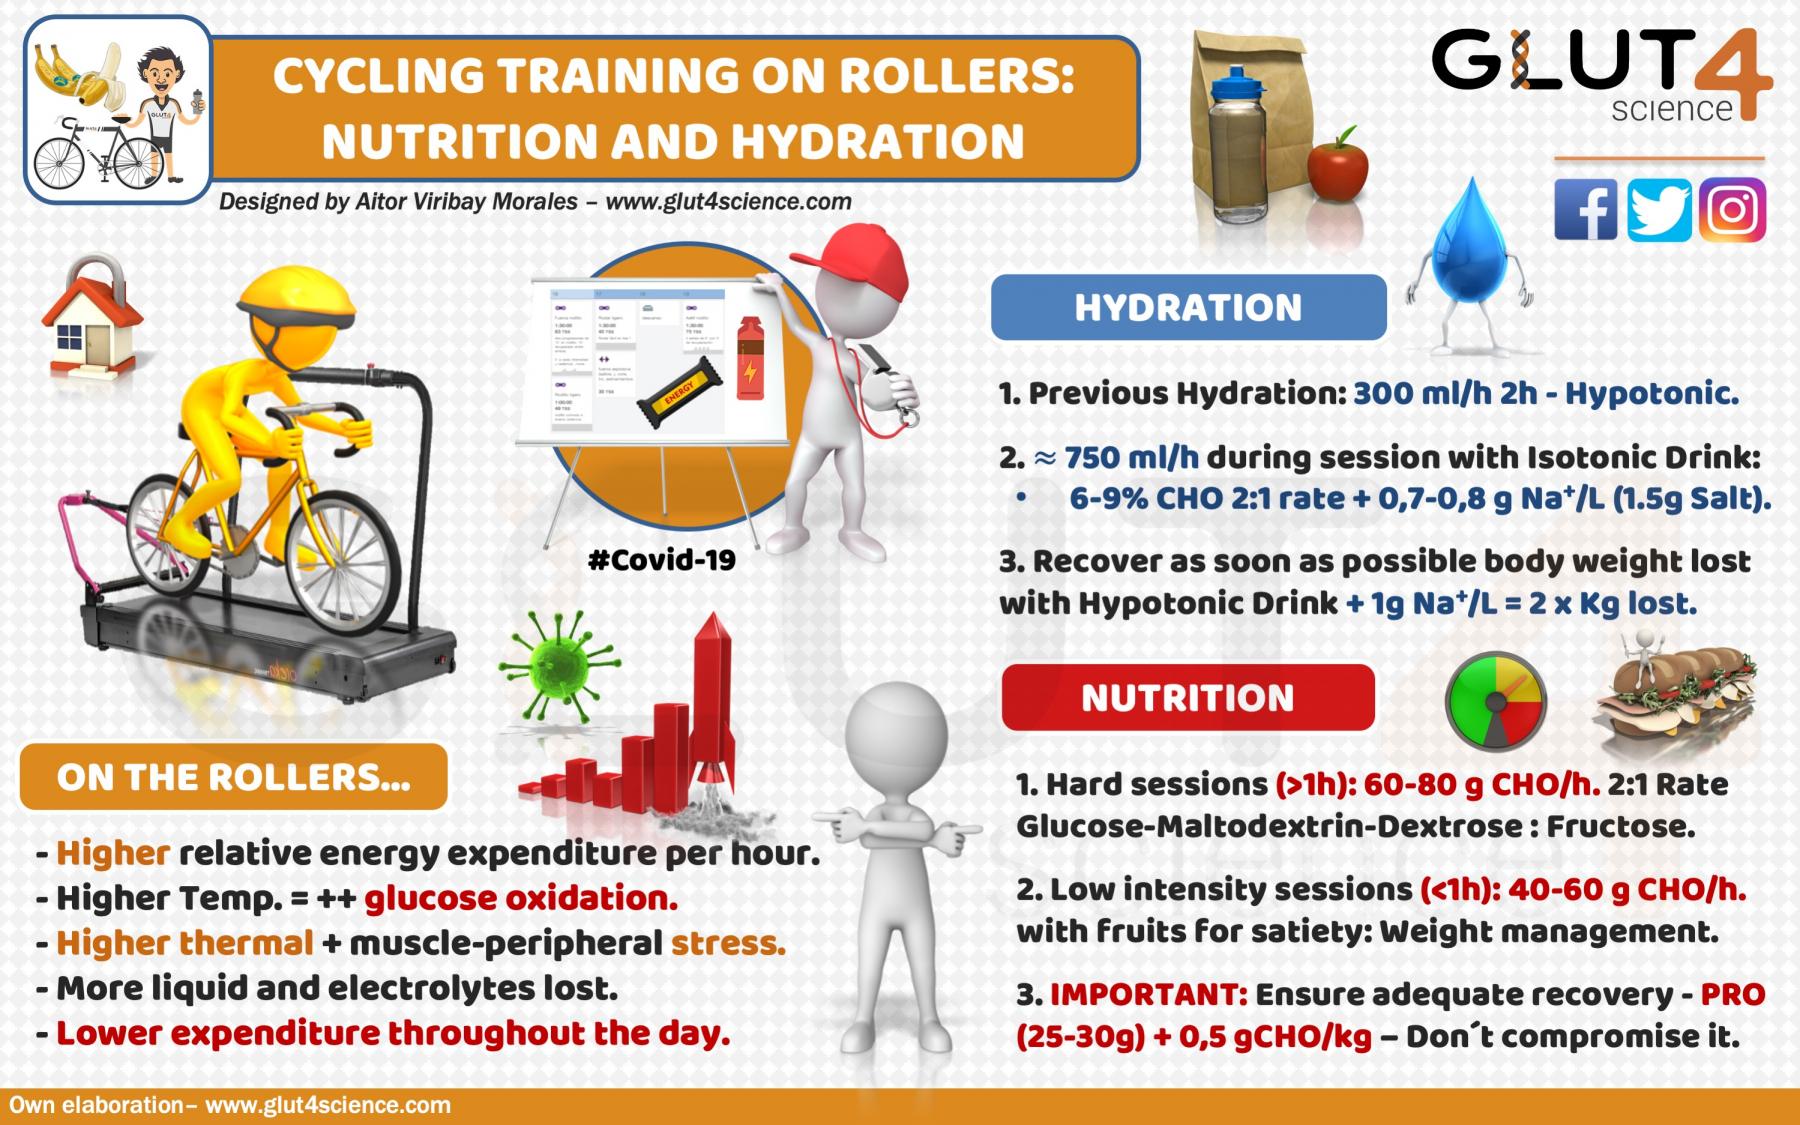 Nutrition and Hydration on Cycling Rollers Training